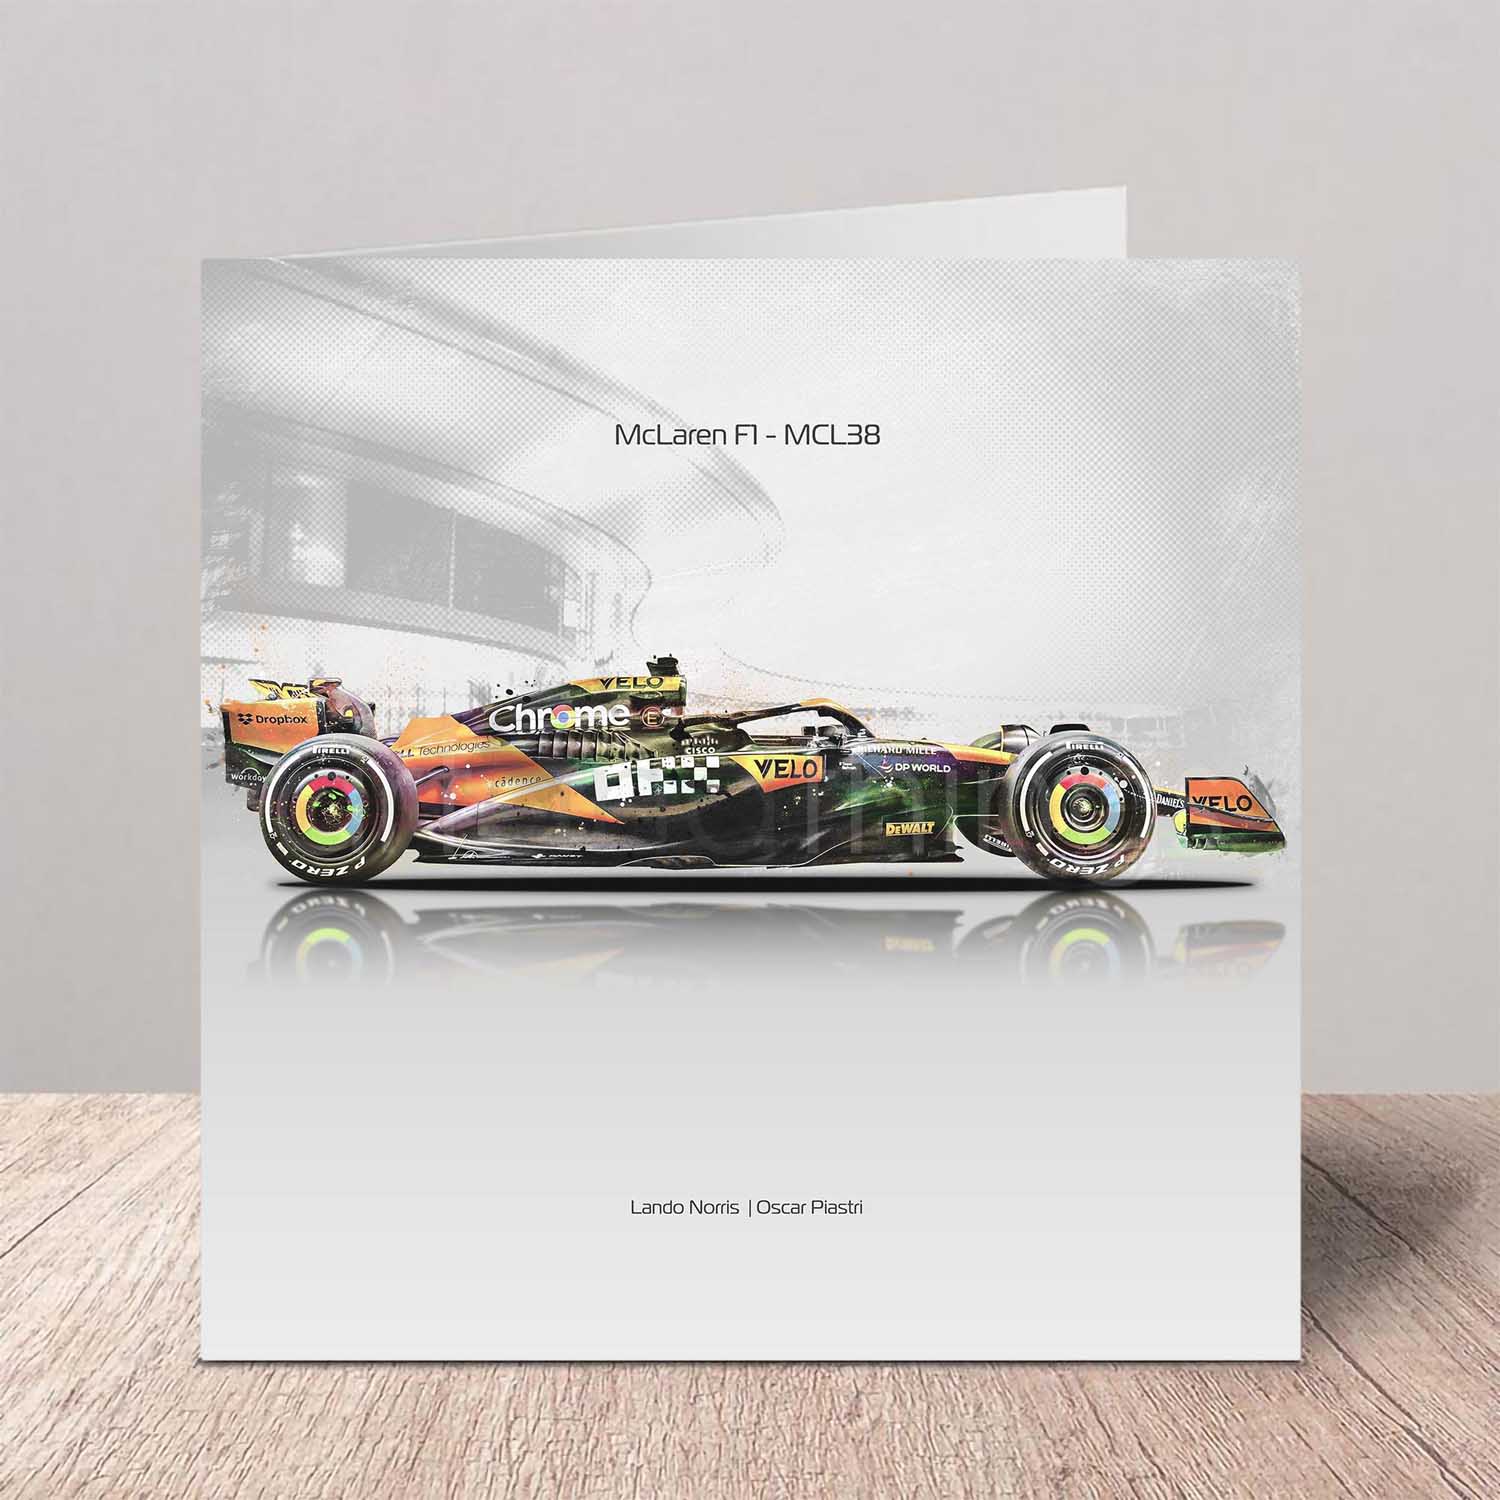 McLaren F1 Greeting Card - MCL38 Side View